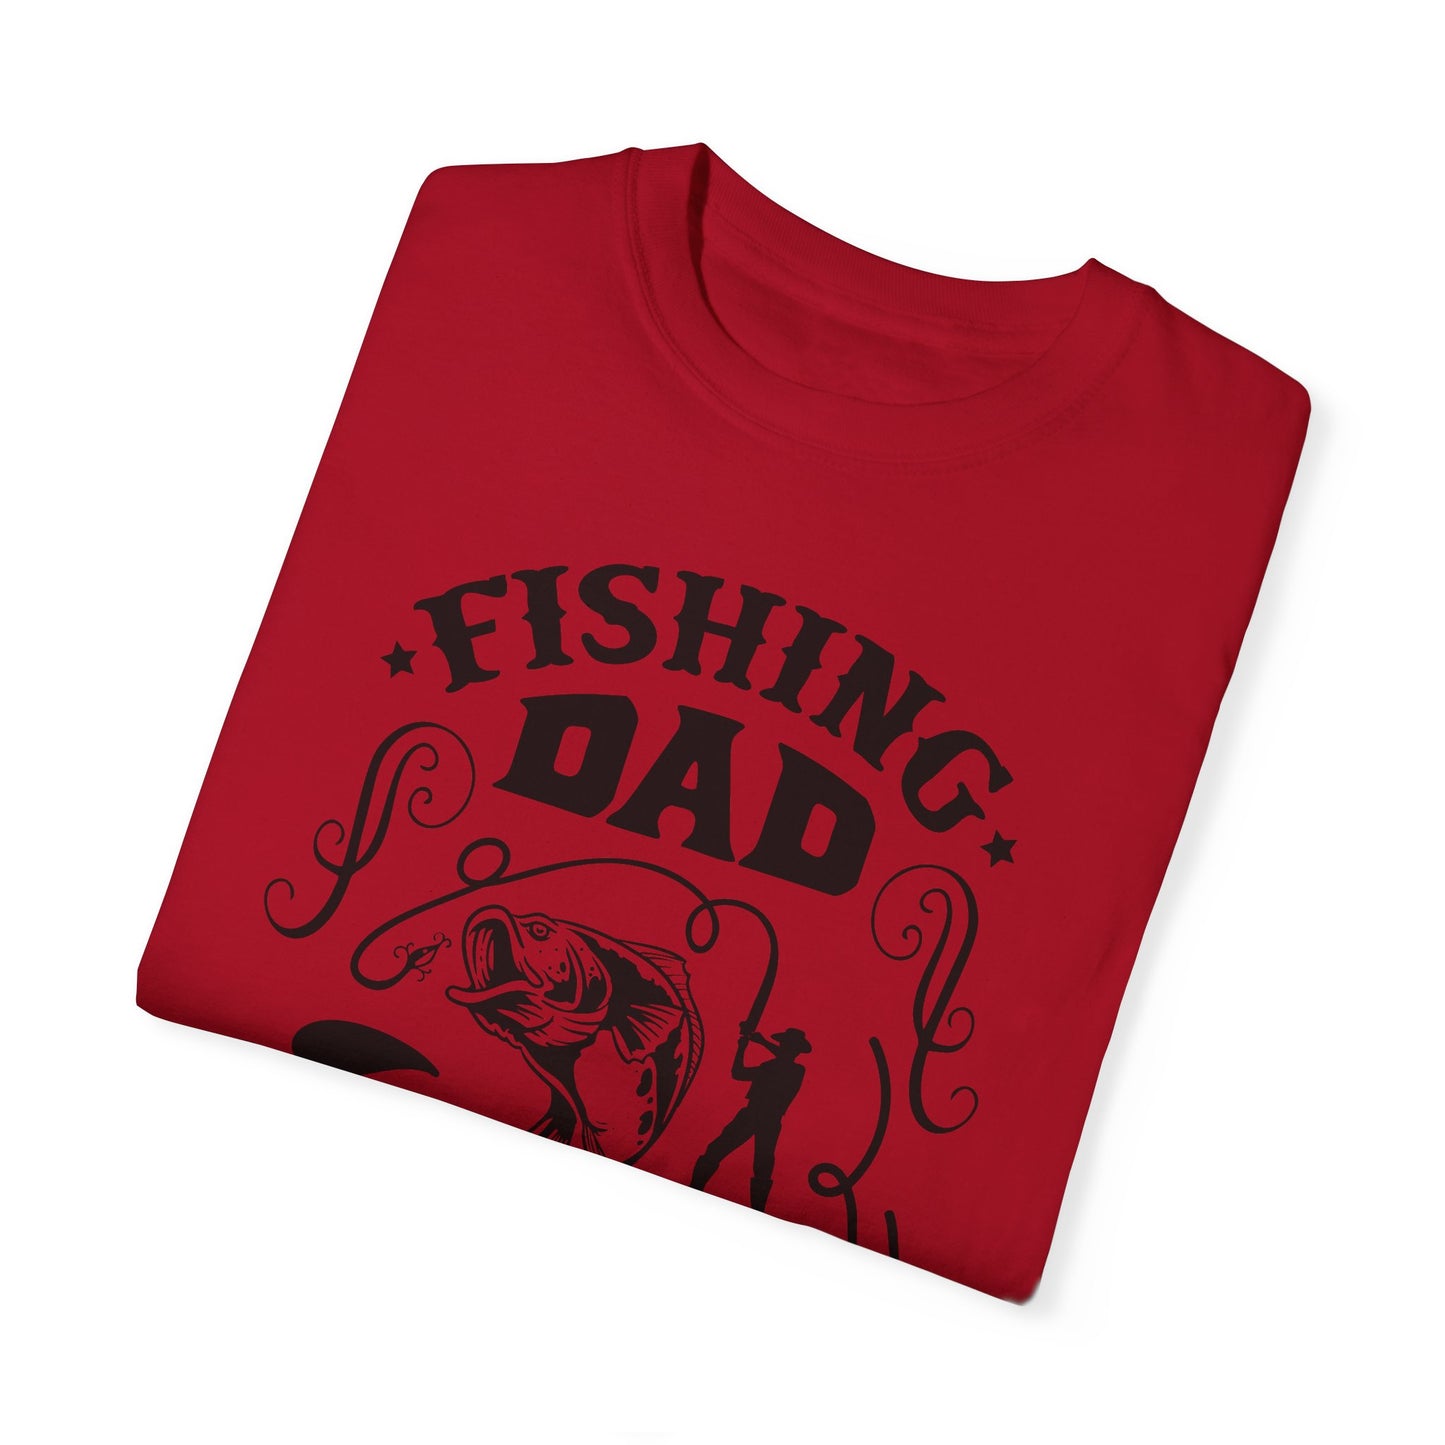 Fishing dad is cool: Unisex Garment-Dyed T-shirt